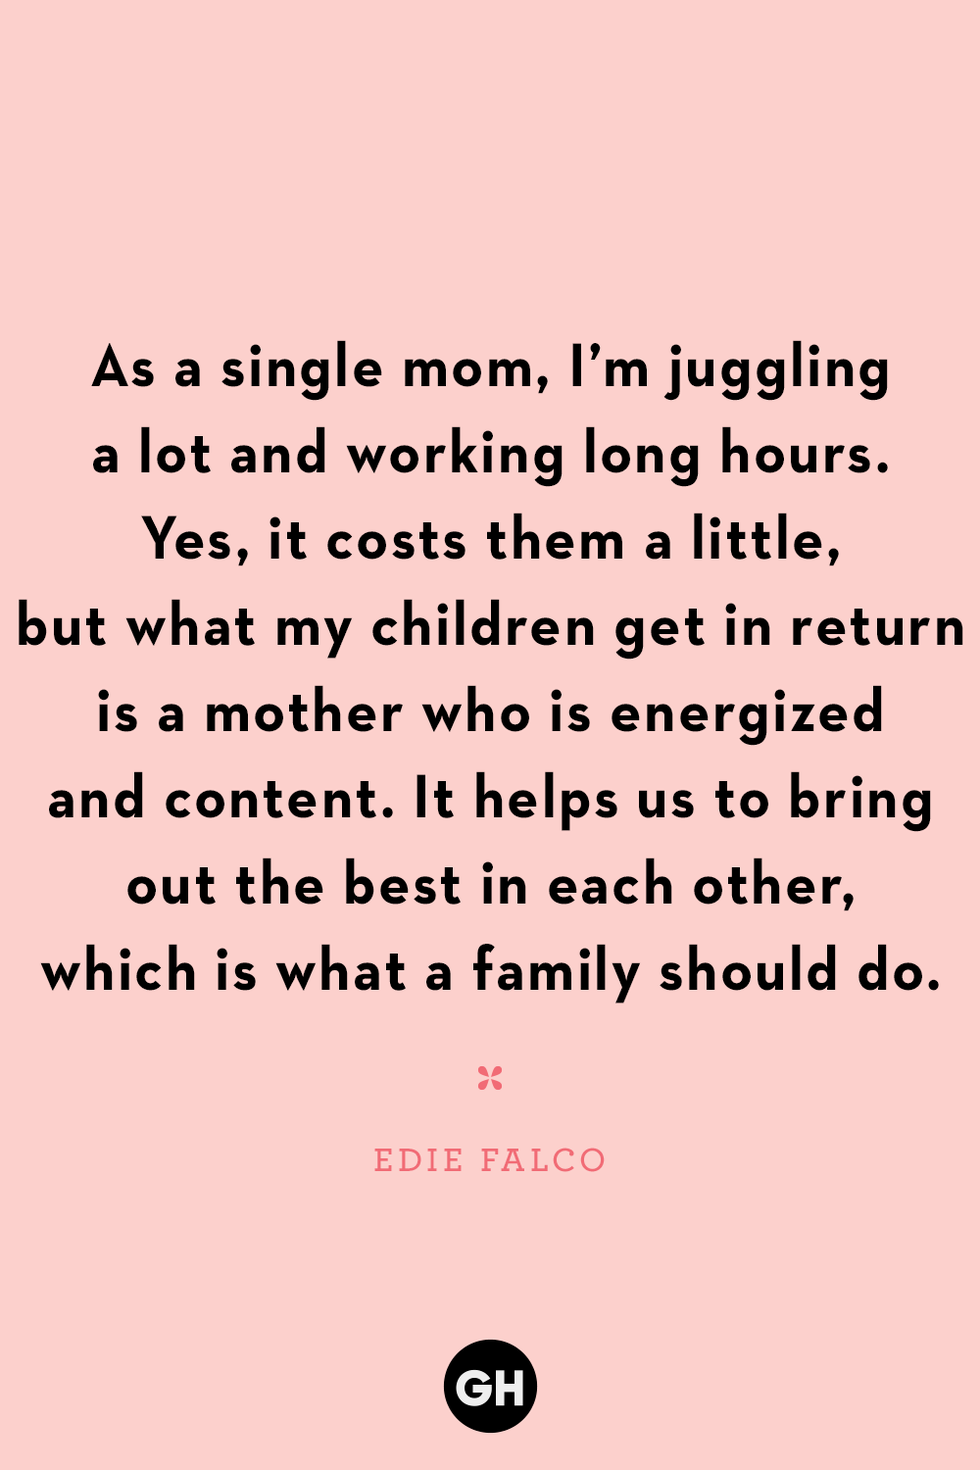 40 Best Single Mom Quotes - Inspiring Quotes About Loving Single Moms